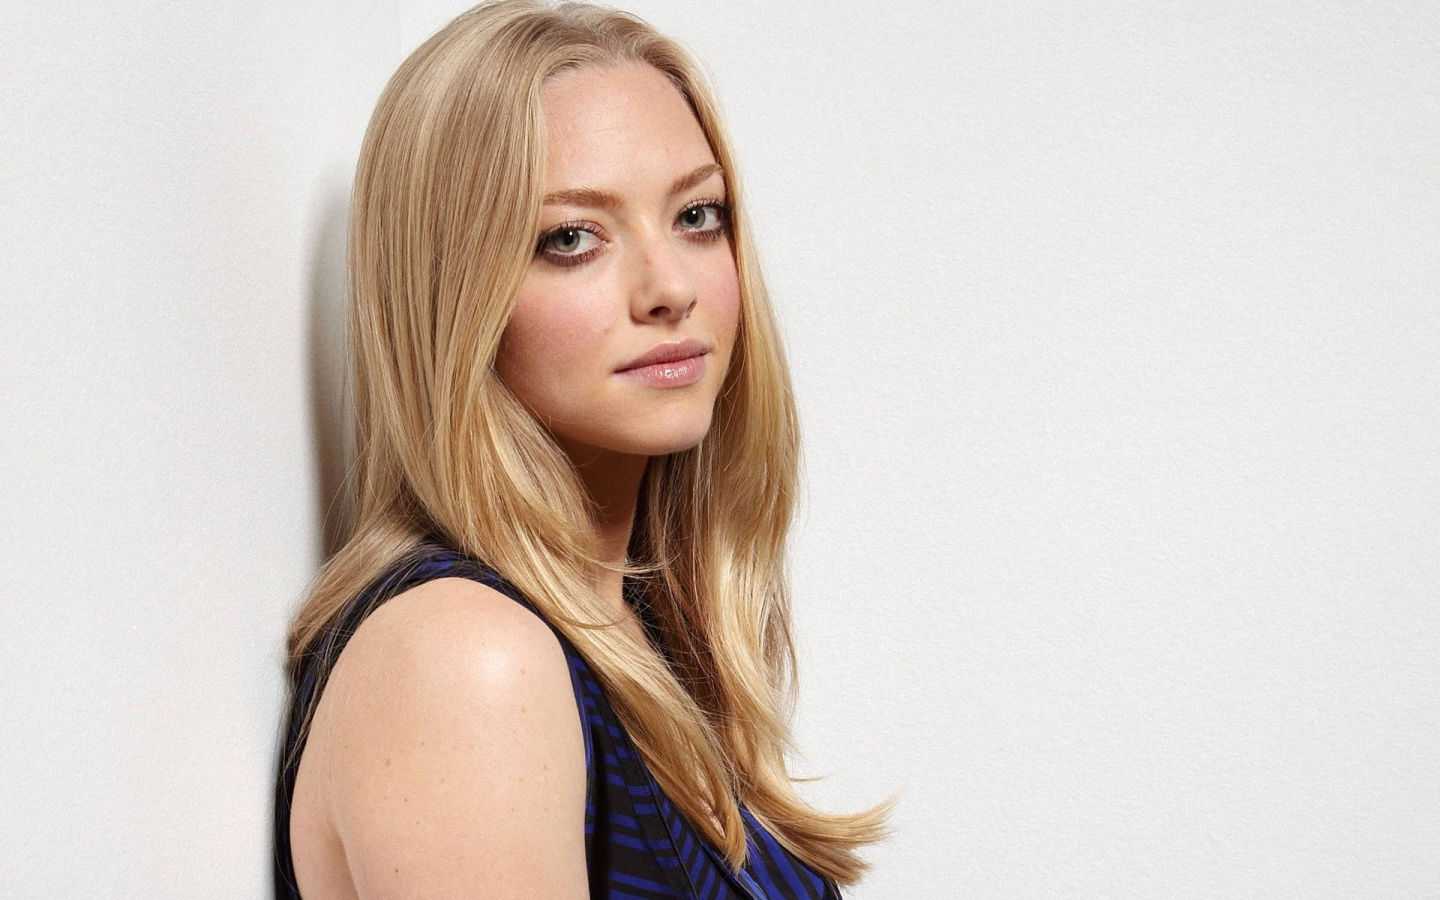 Amanda Seyfried Images And Pictures 7006 Hd Wallpapers | ibwall.com